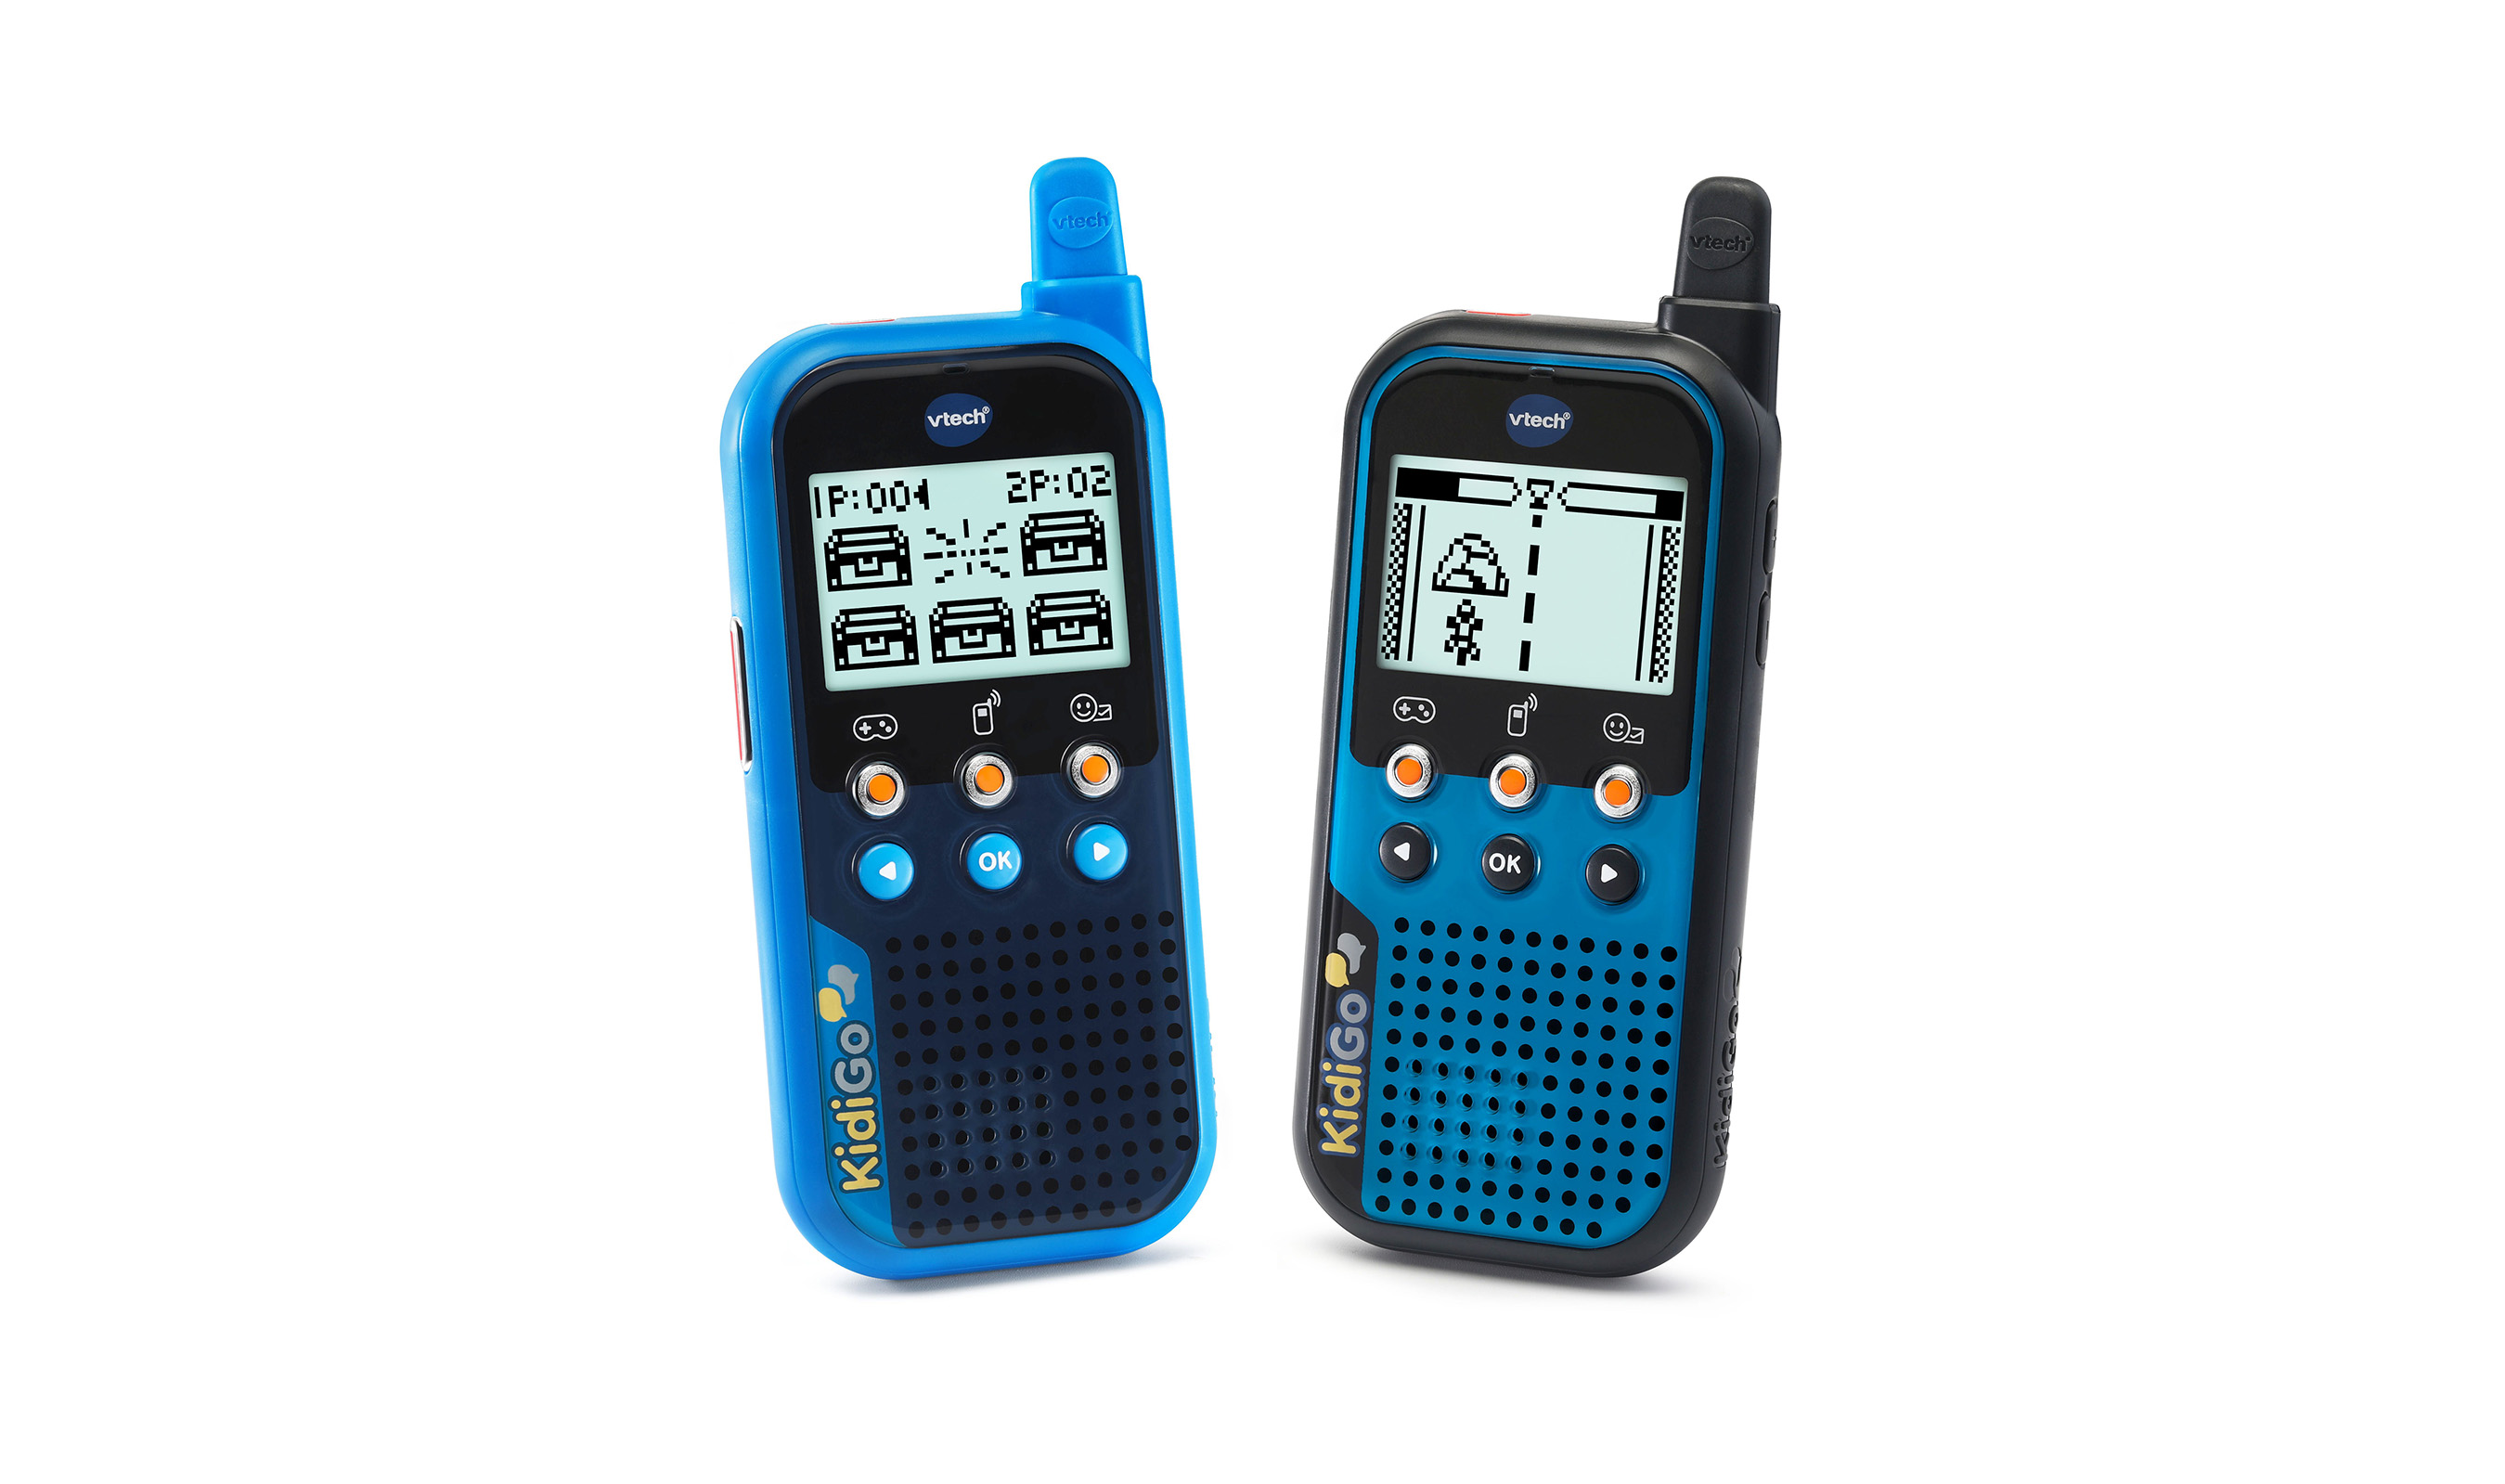 Kids Can Stay Connected with KidiGo Walkie Talkies by VTech!  #MegaChristmas19 - It's Free At Last